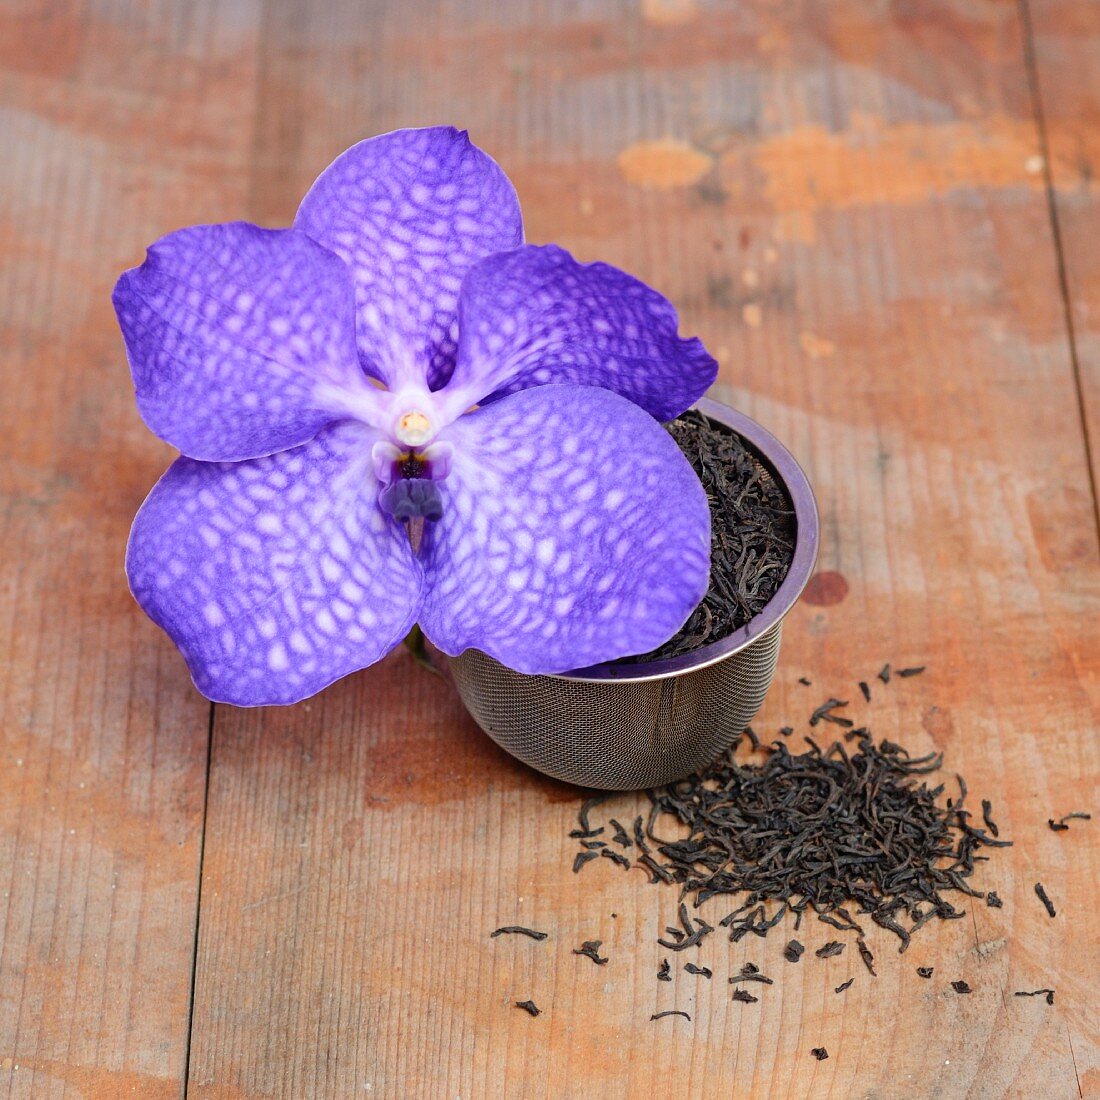 Tea leaves and a purple orchid